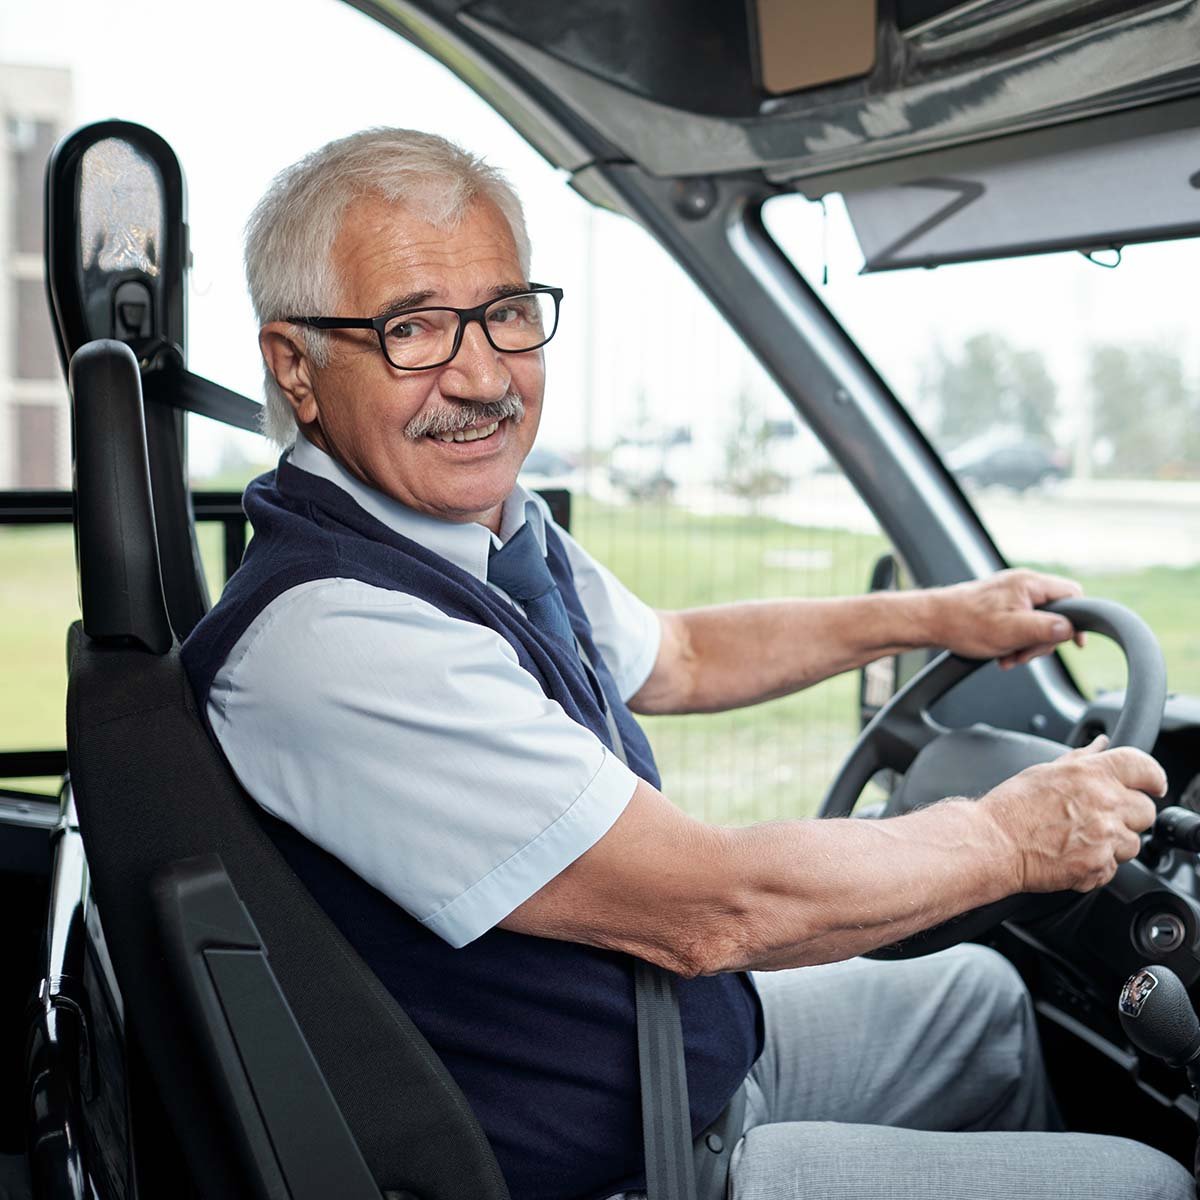 An Immanuel bus driver looks back and smiles from the driver seat of a van.